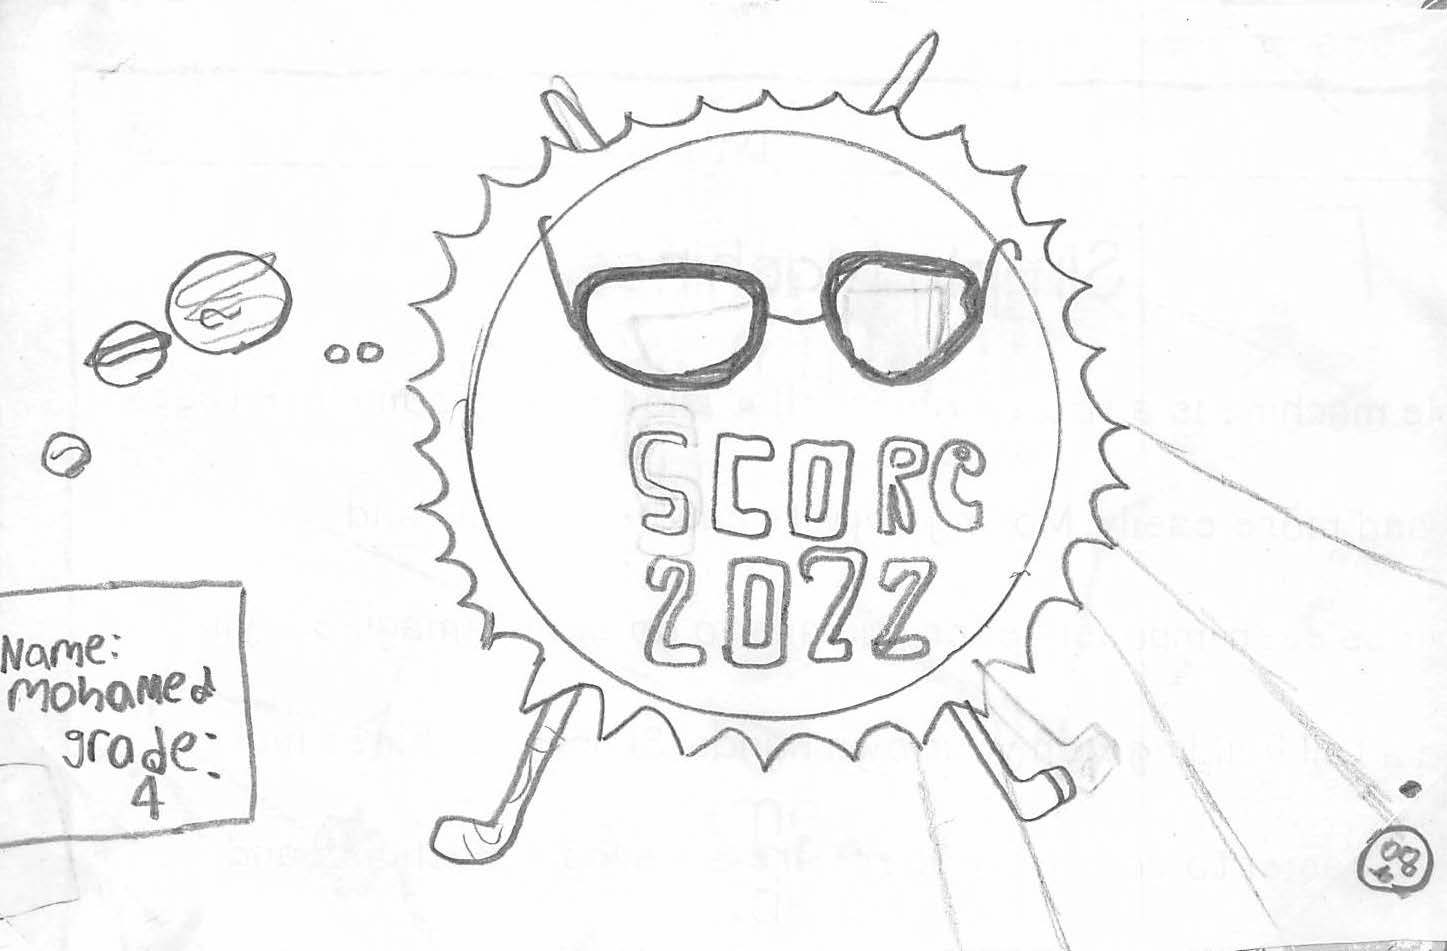 Pencil drawing for the SCORE! logo contest. The drawing includes the sun with sunglasses.